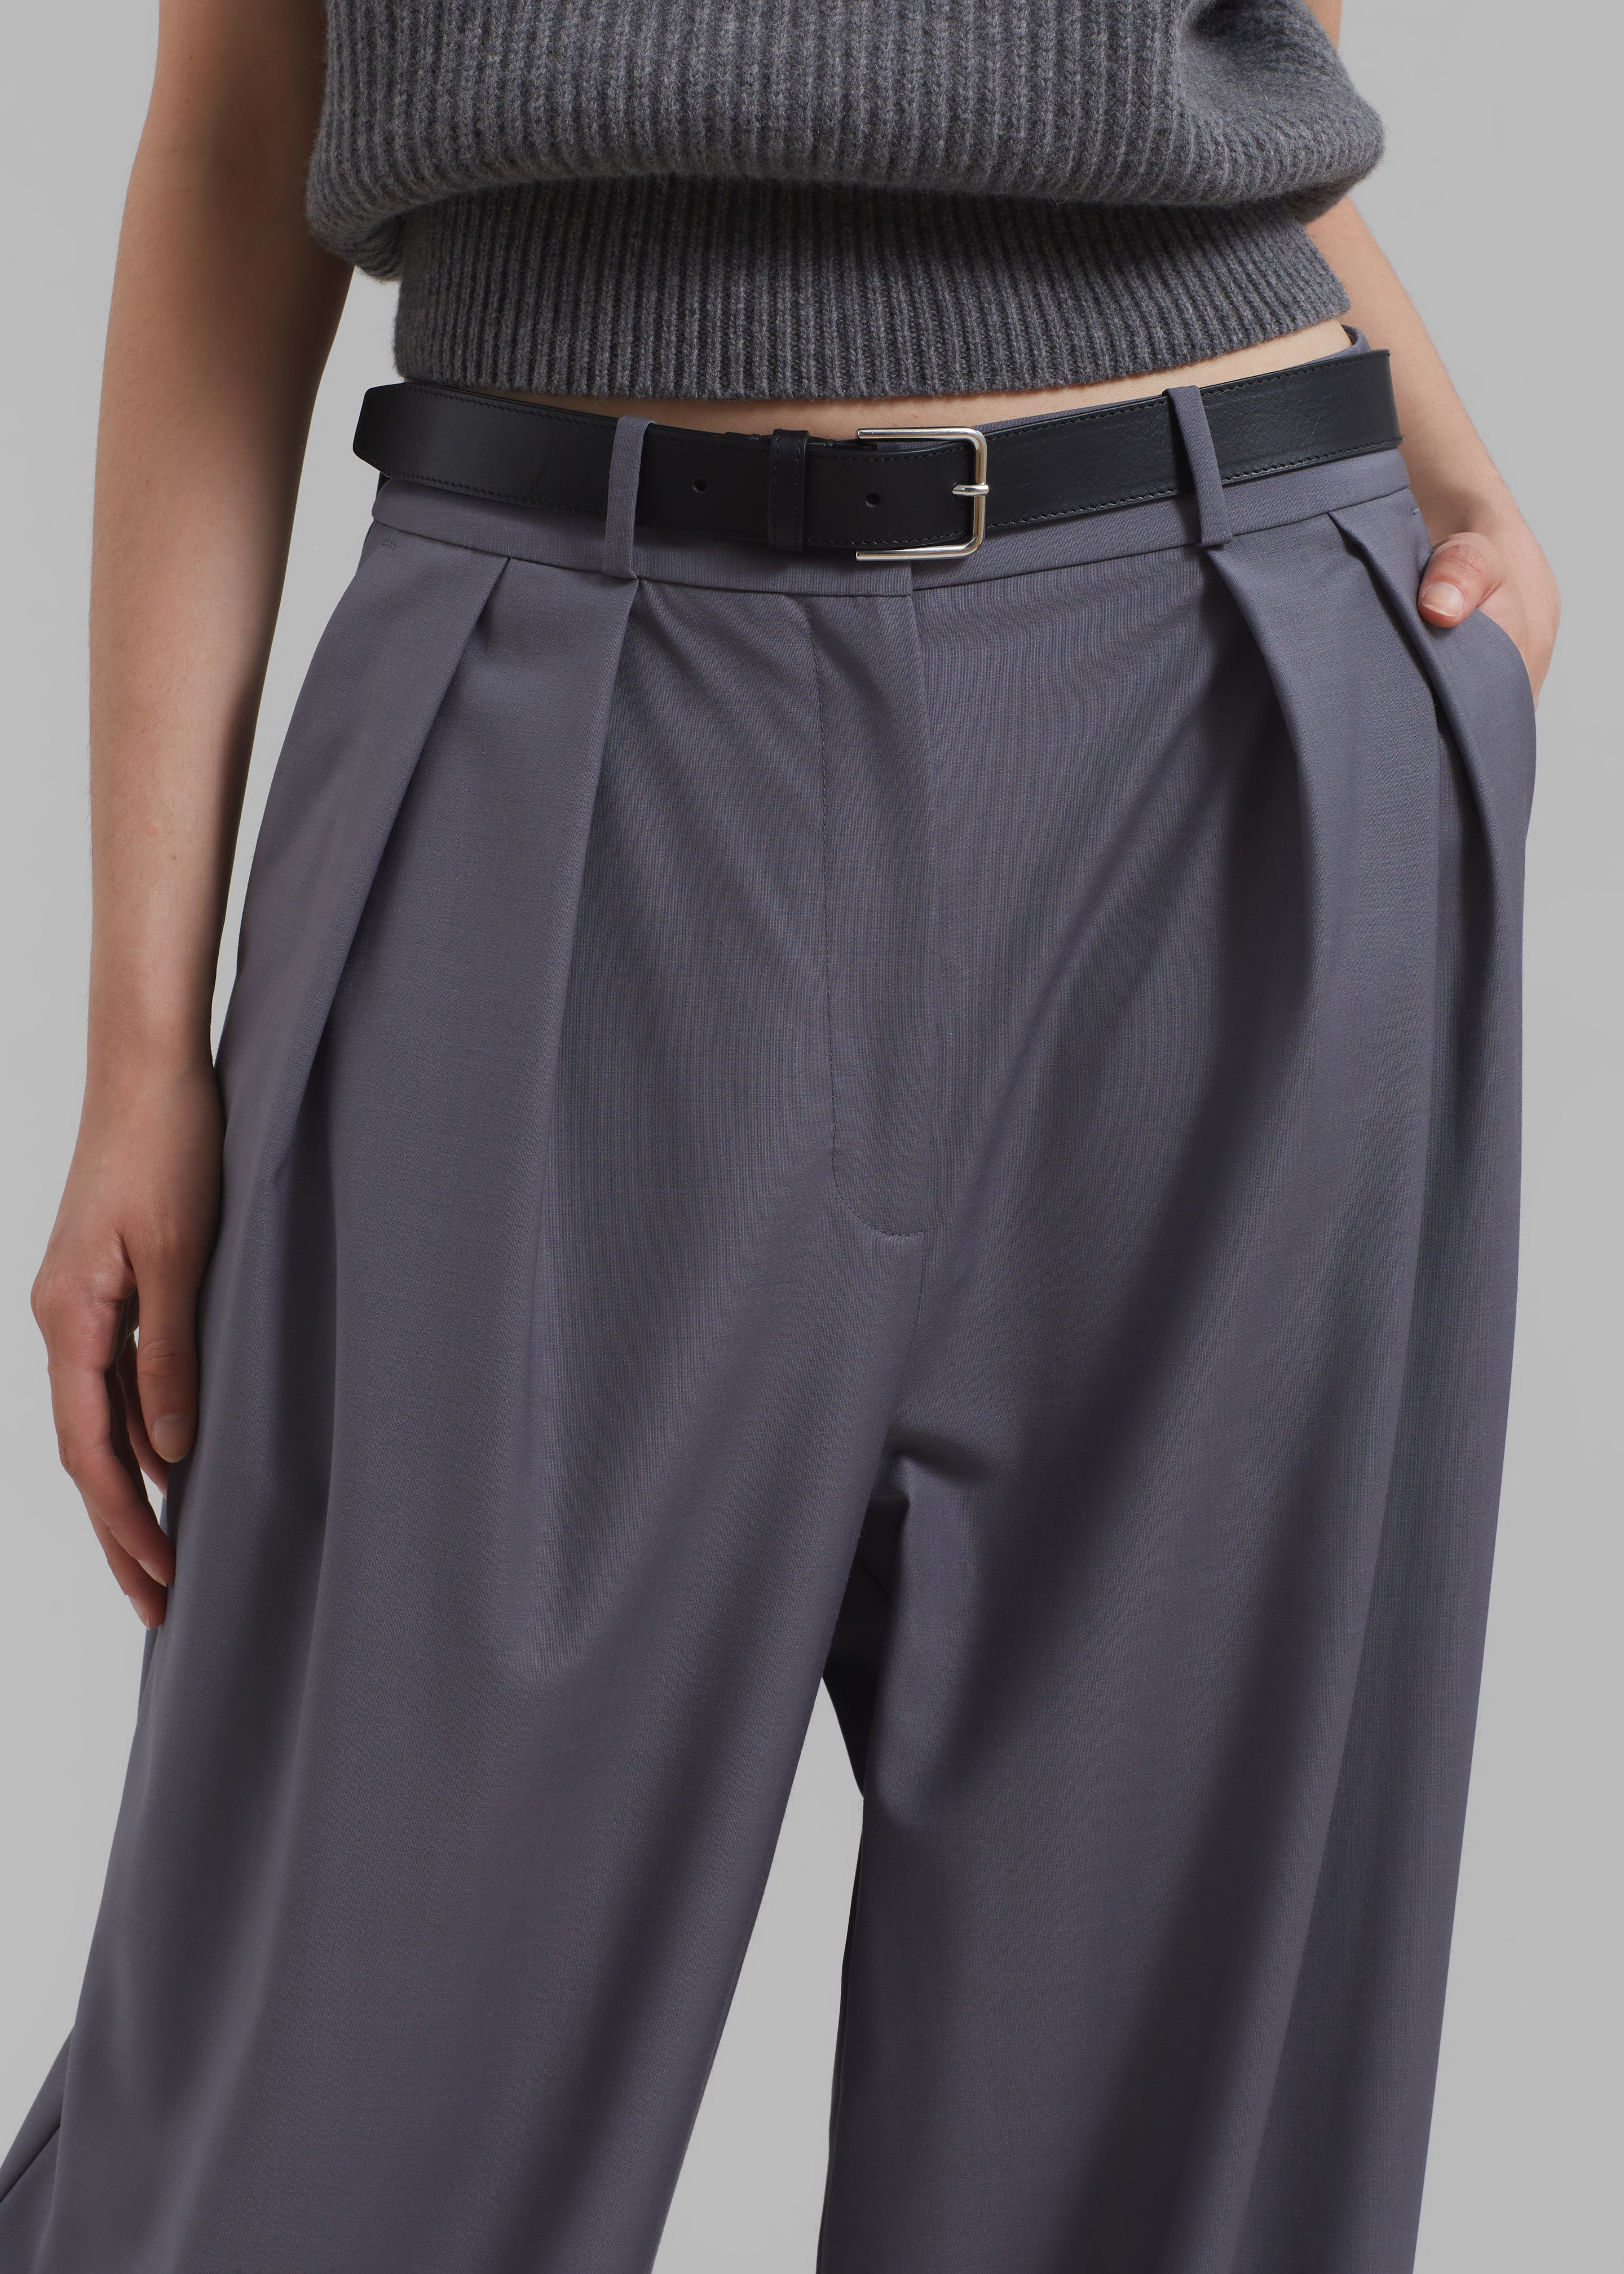 Ripley Pleated Trousers - Grey - 4